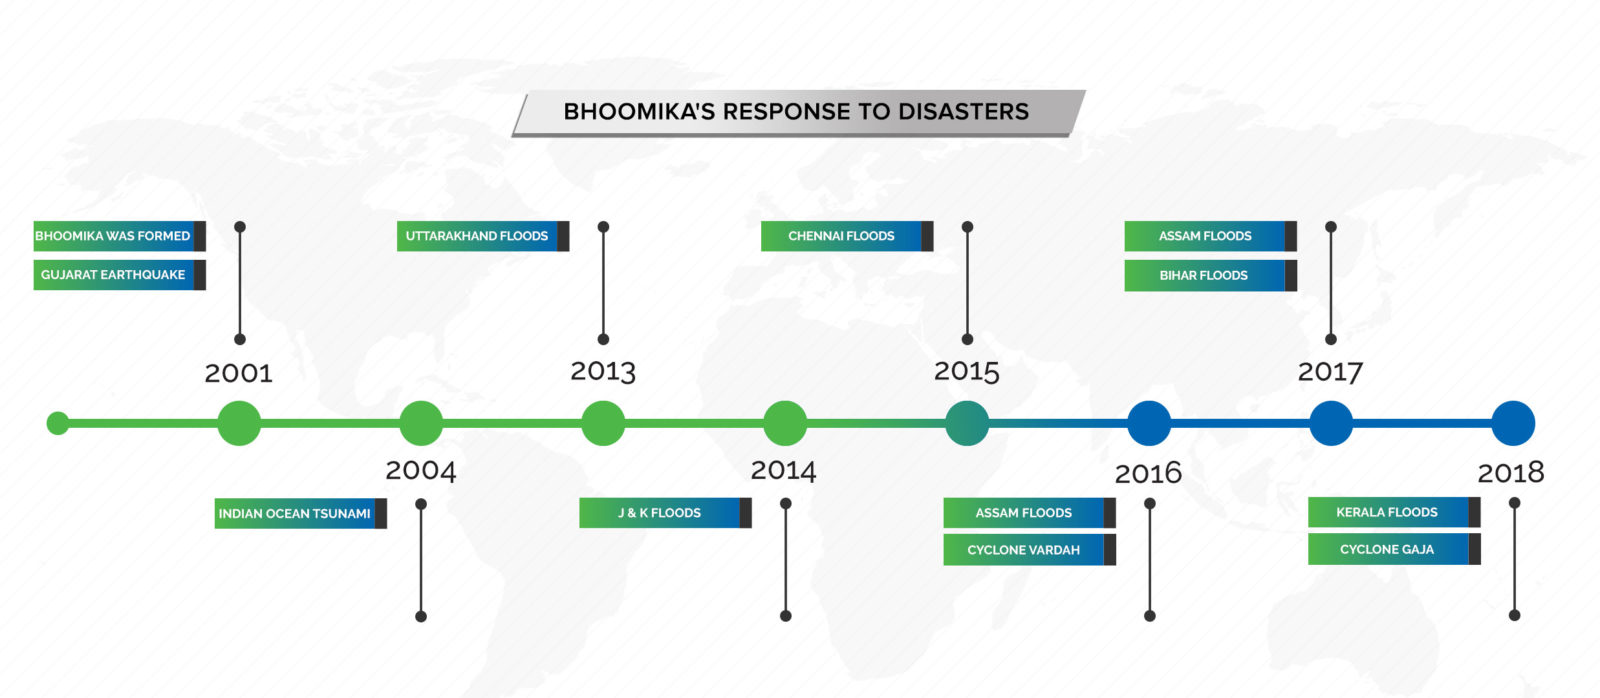 About Us - Bhoomika's Response to Disasters